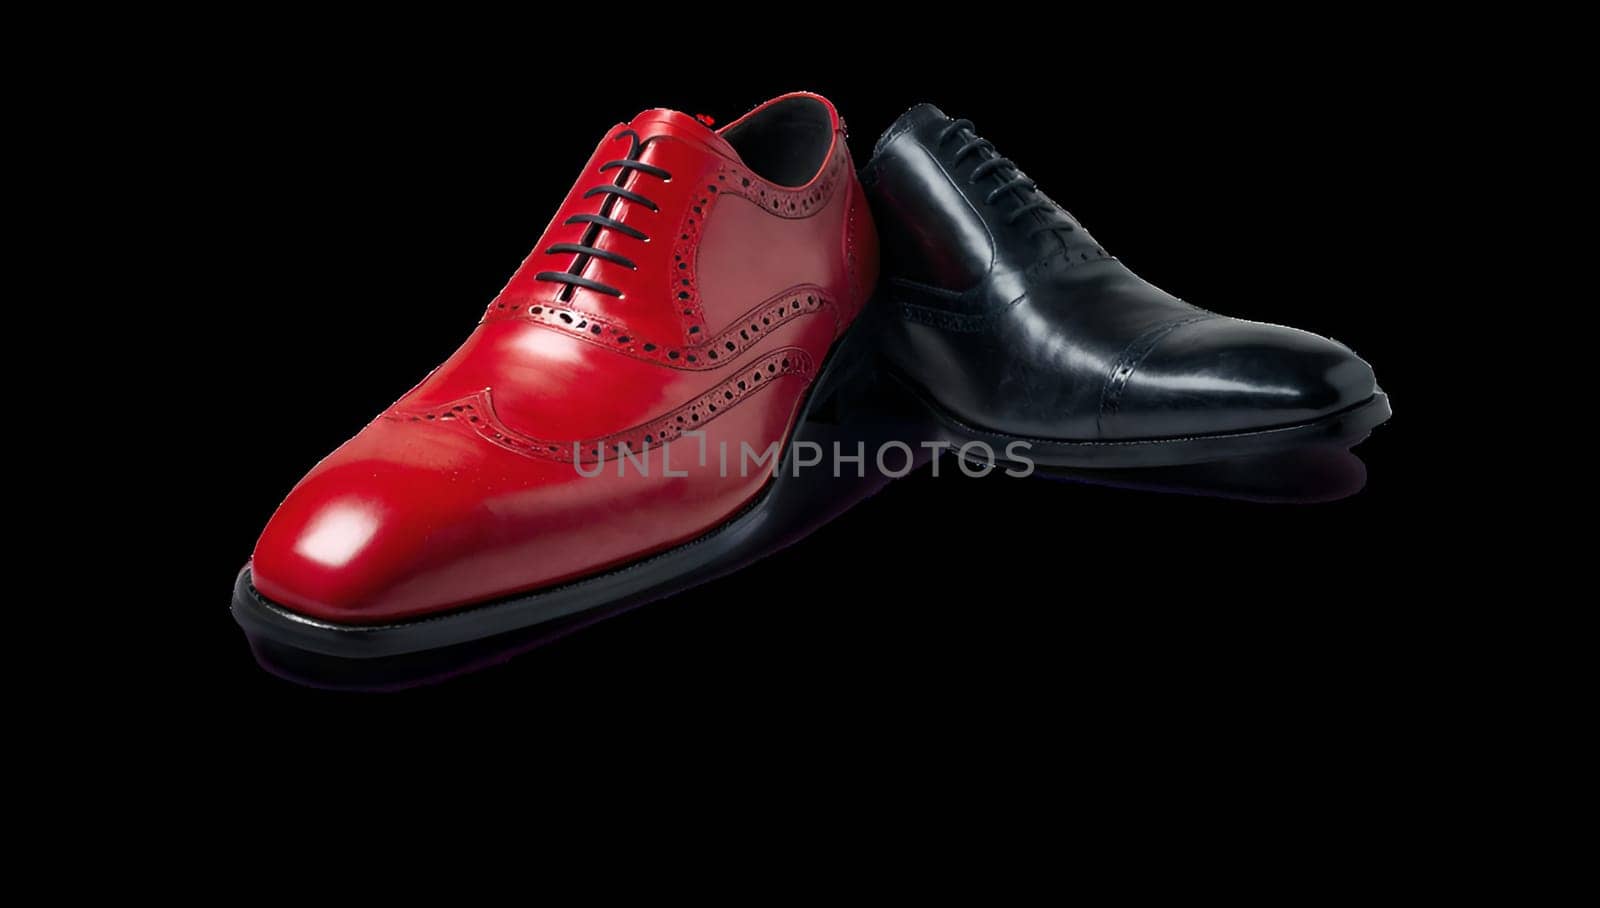 A pair of men's shoes in red and black colors by Севостьянов